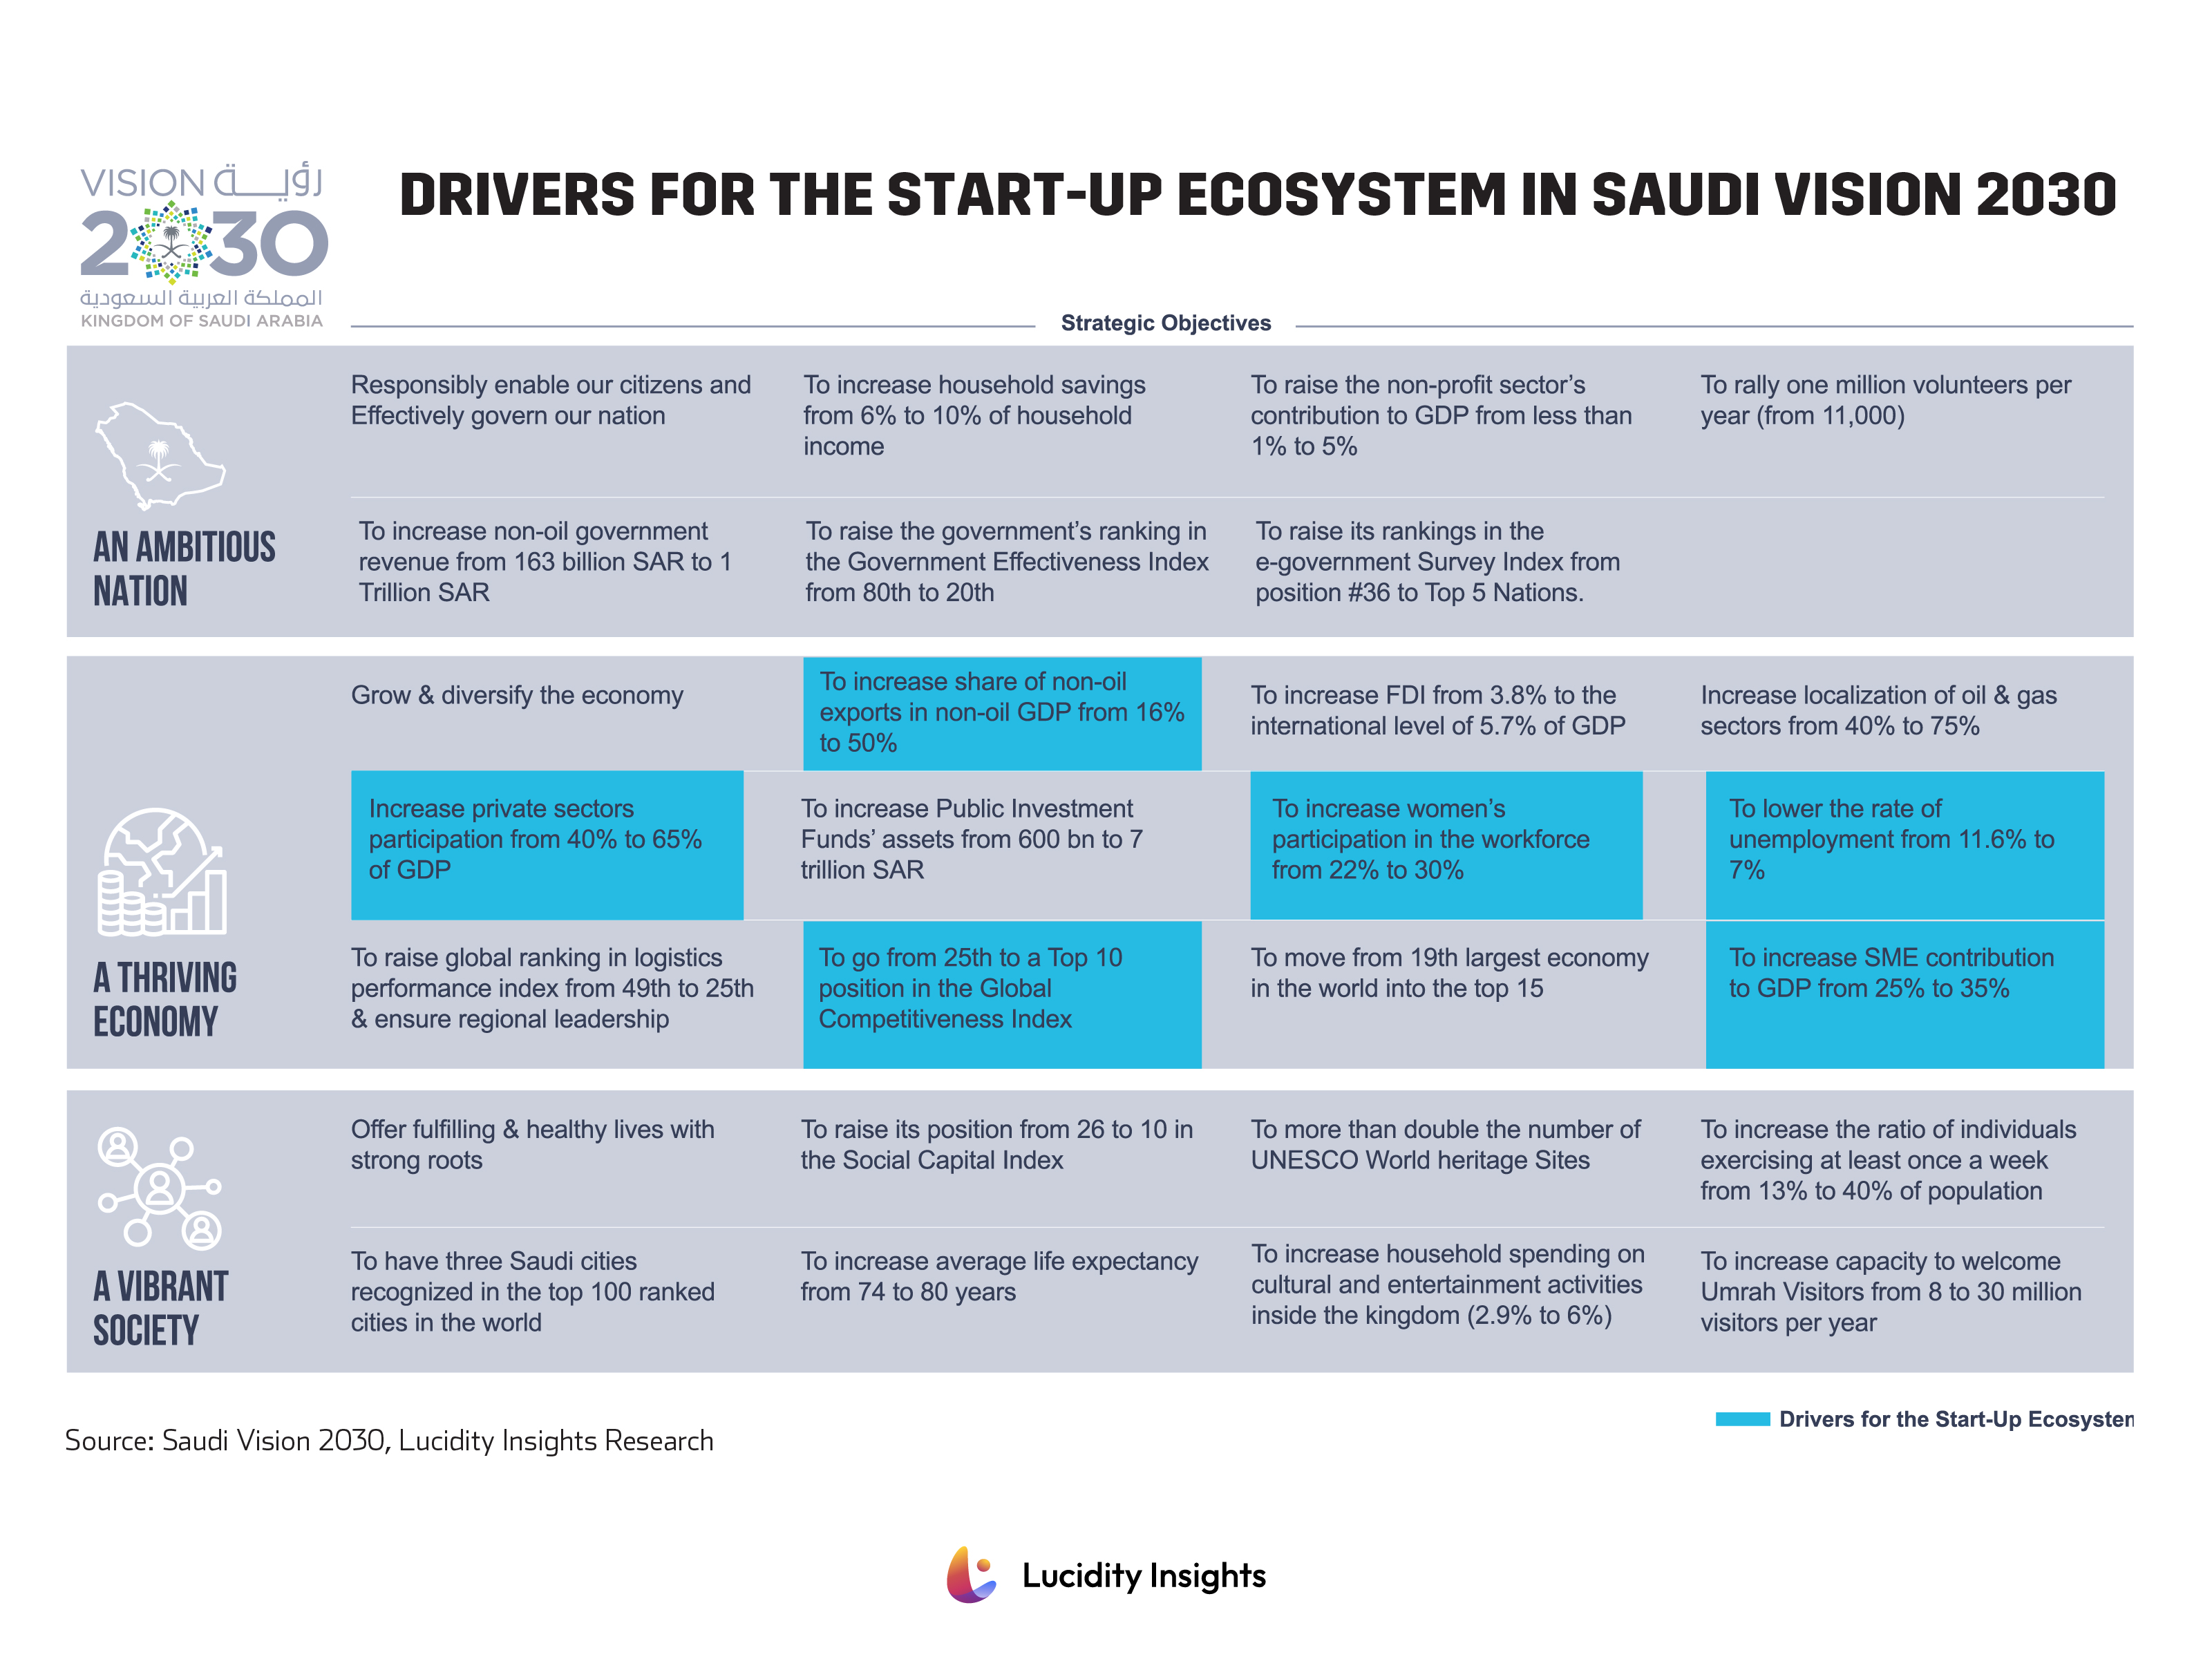 Drivers for the Start-up Ecosystem in Saudi Vision 2030